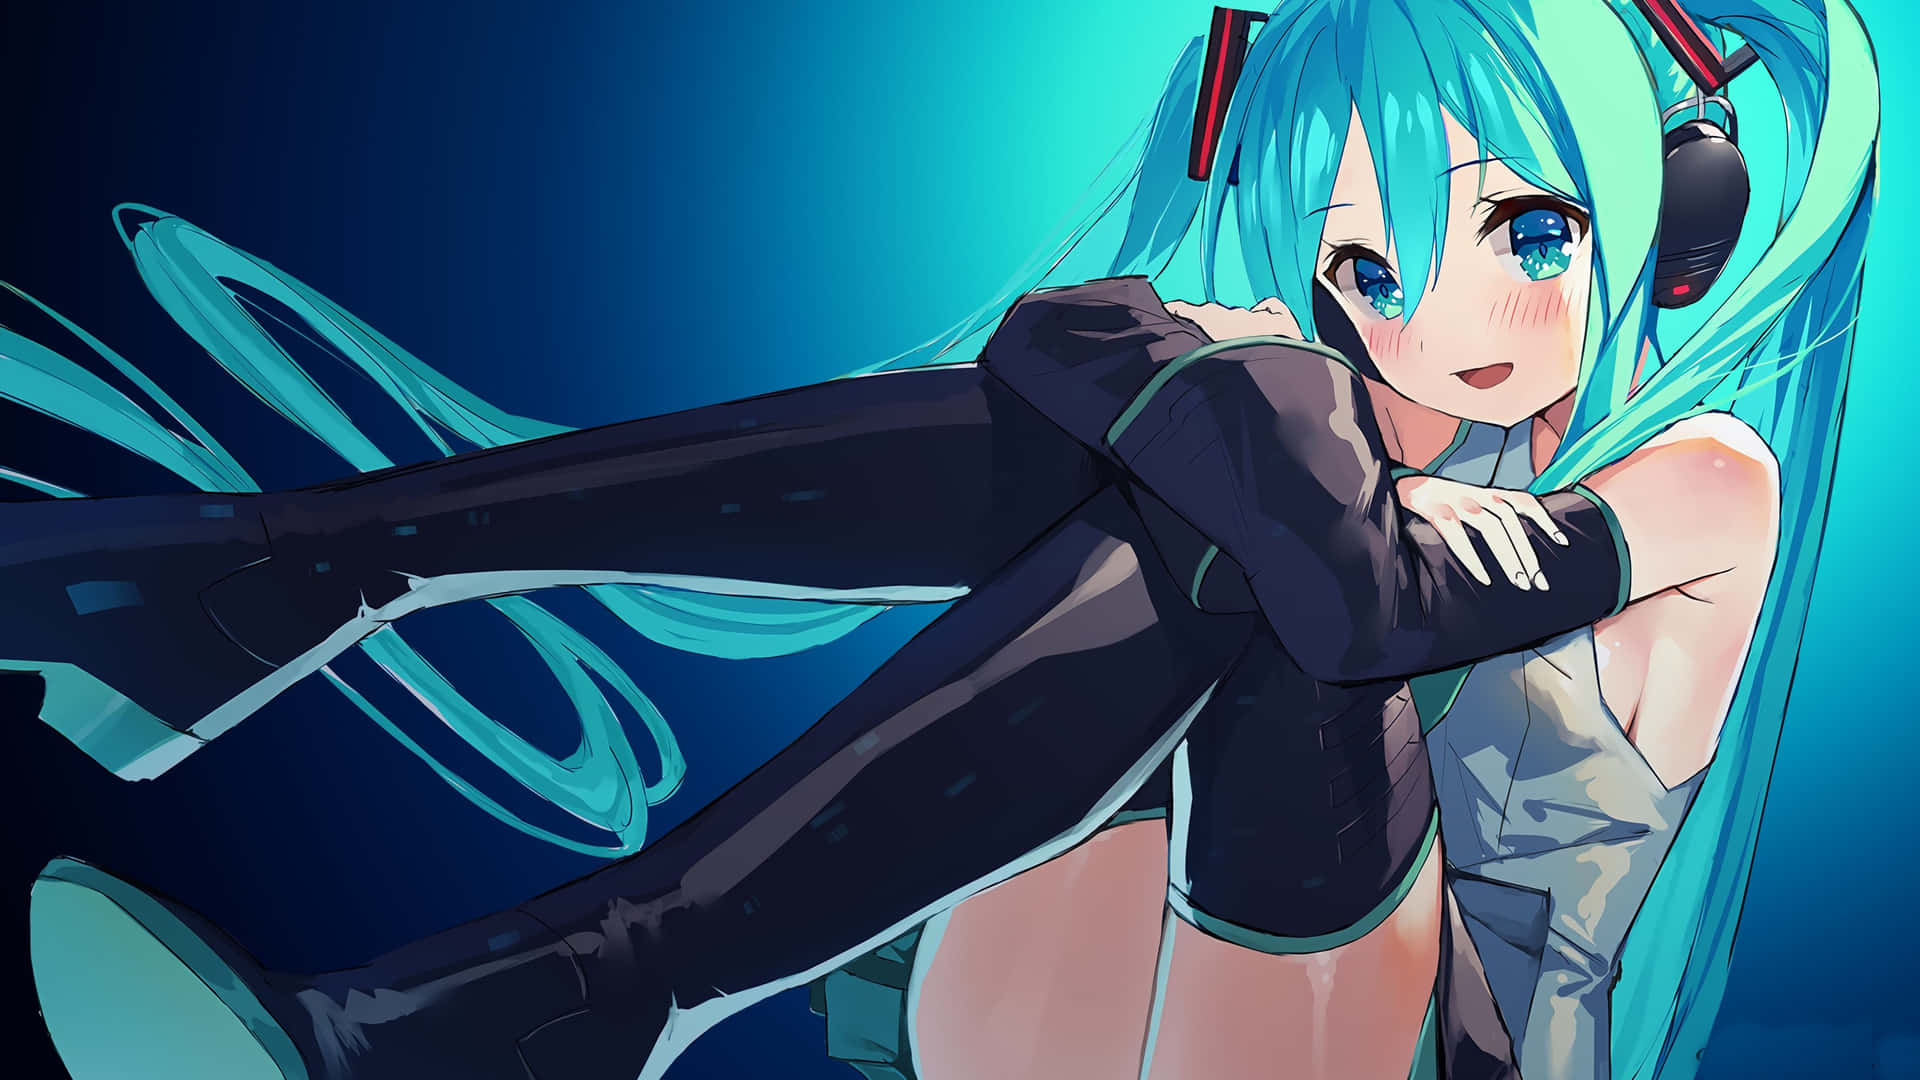 Hatsune Miku Lights Up The Night with Her Marvelous Music